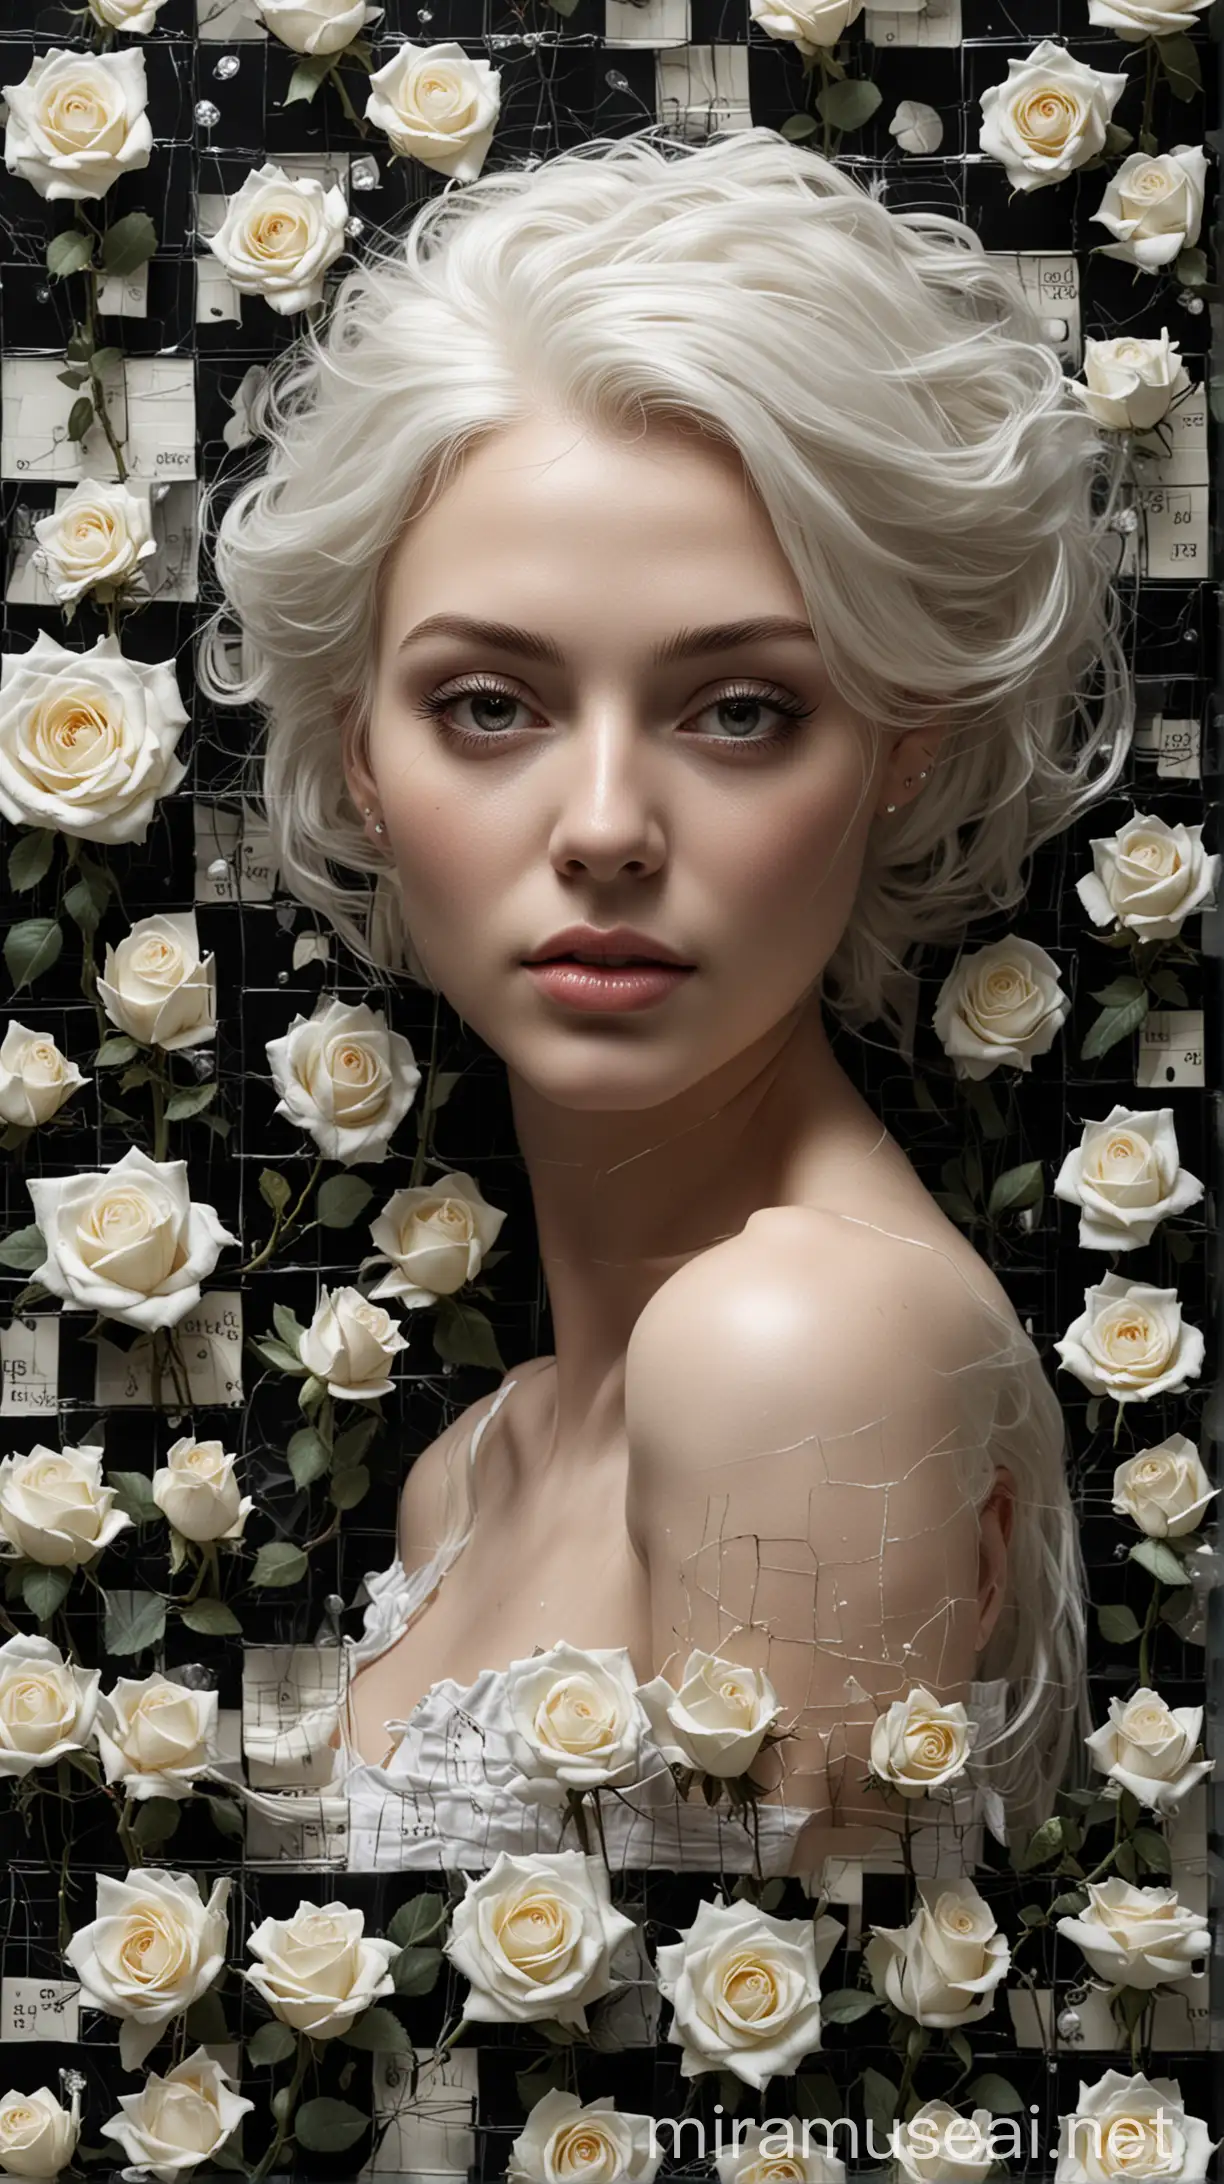 Surreal Woman Portrait with Glossy Skin and White Rose in Fantasy Setting